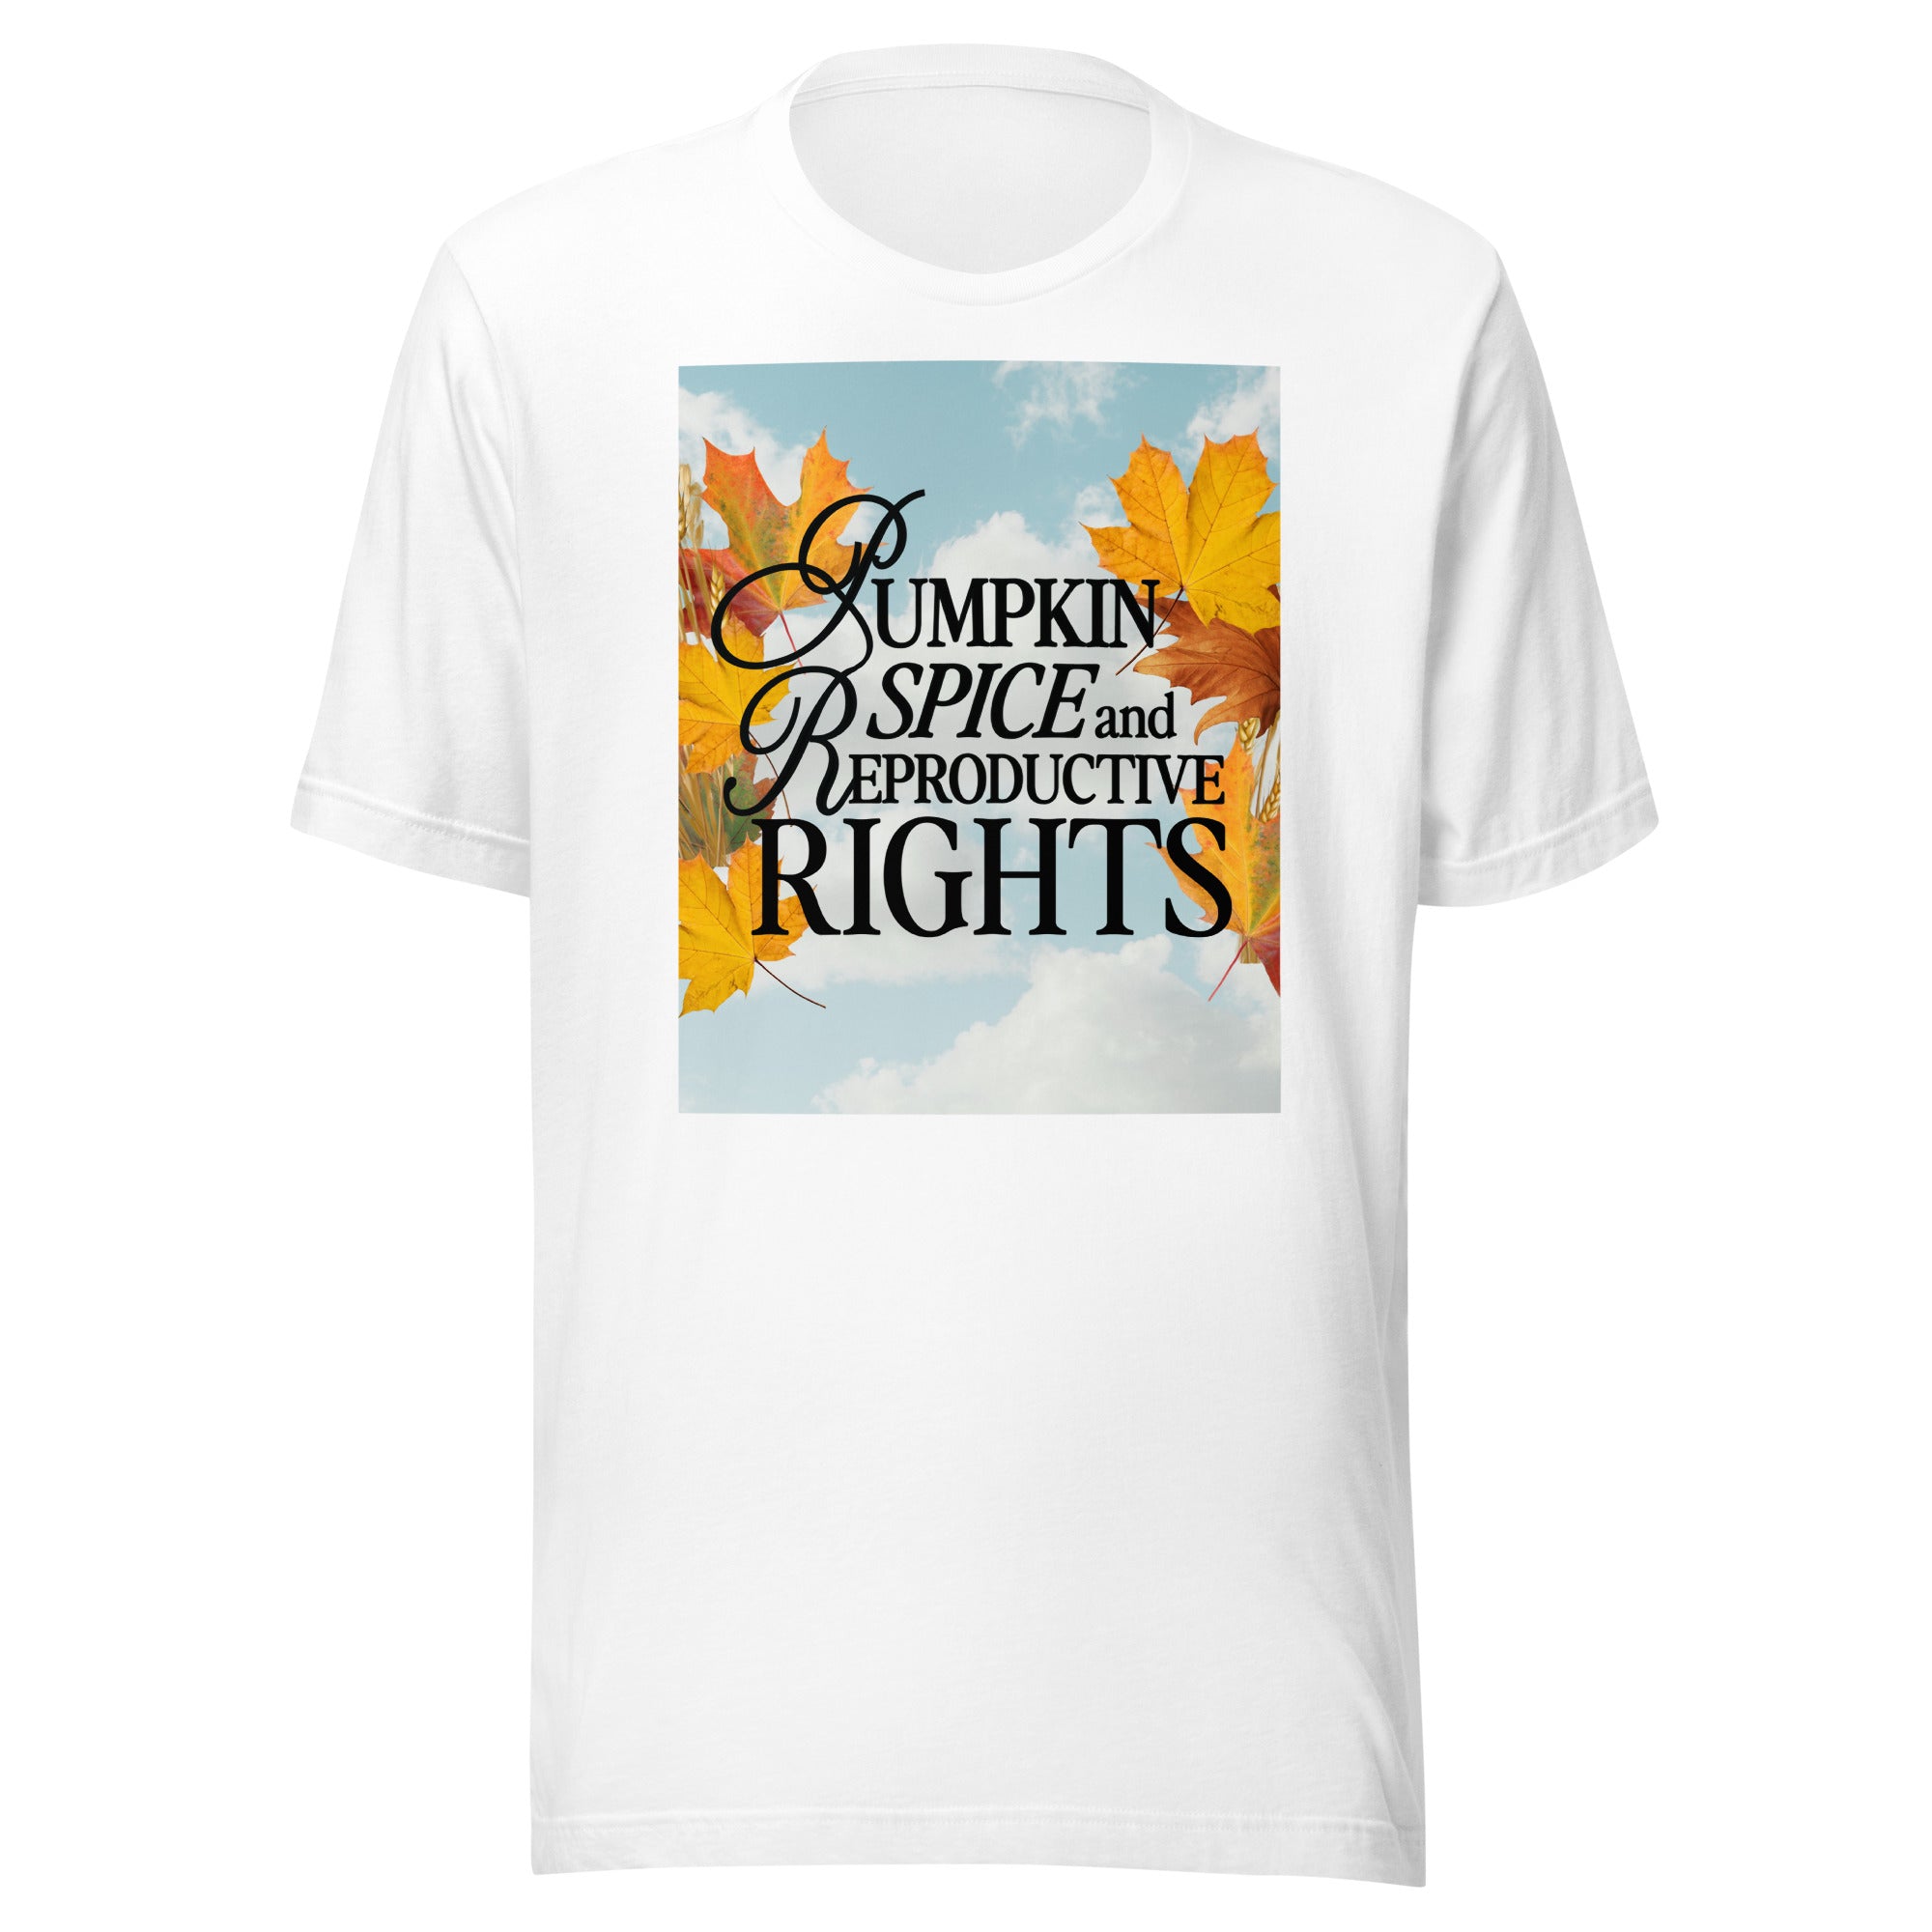 Pumpkin Spice & Reproductive Rights Tee